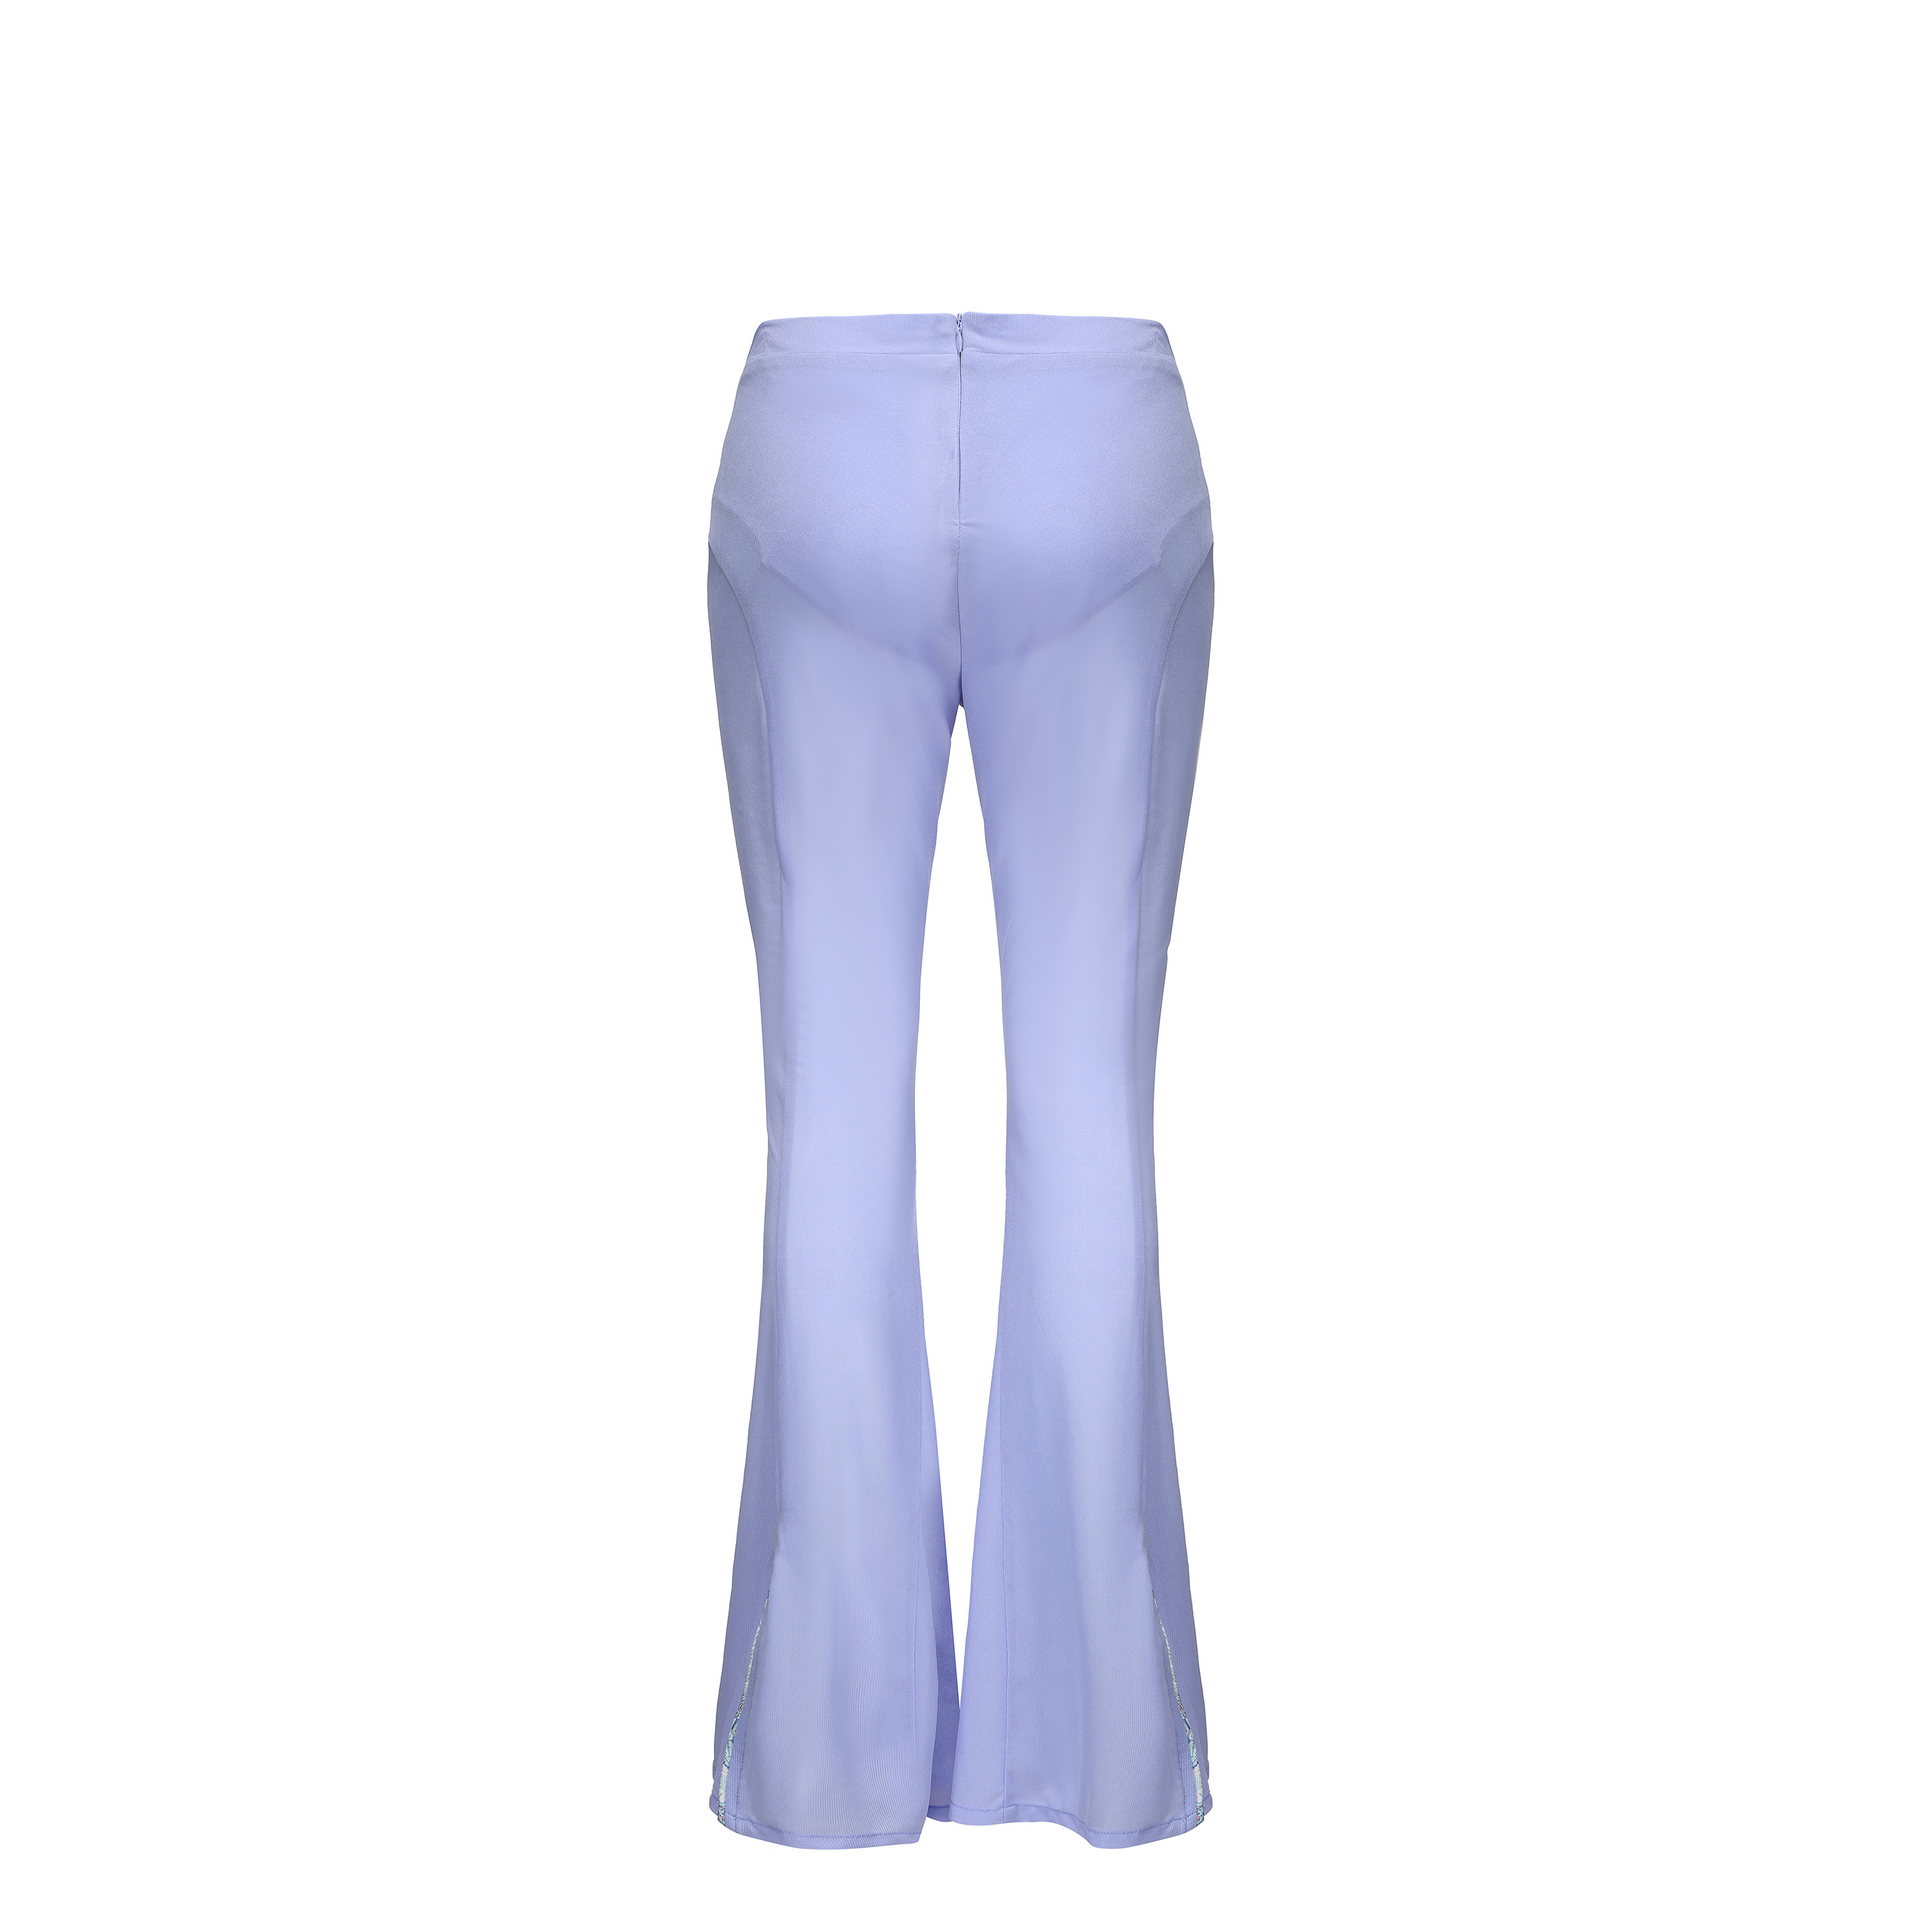 Meng Mid Rise Flare Pants, MID-RISE - WIDE-LEG - FULL LENGTH, Stretch Knit Fabric and Lining, Brocade Knot Button Center Front, lavender, back